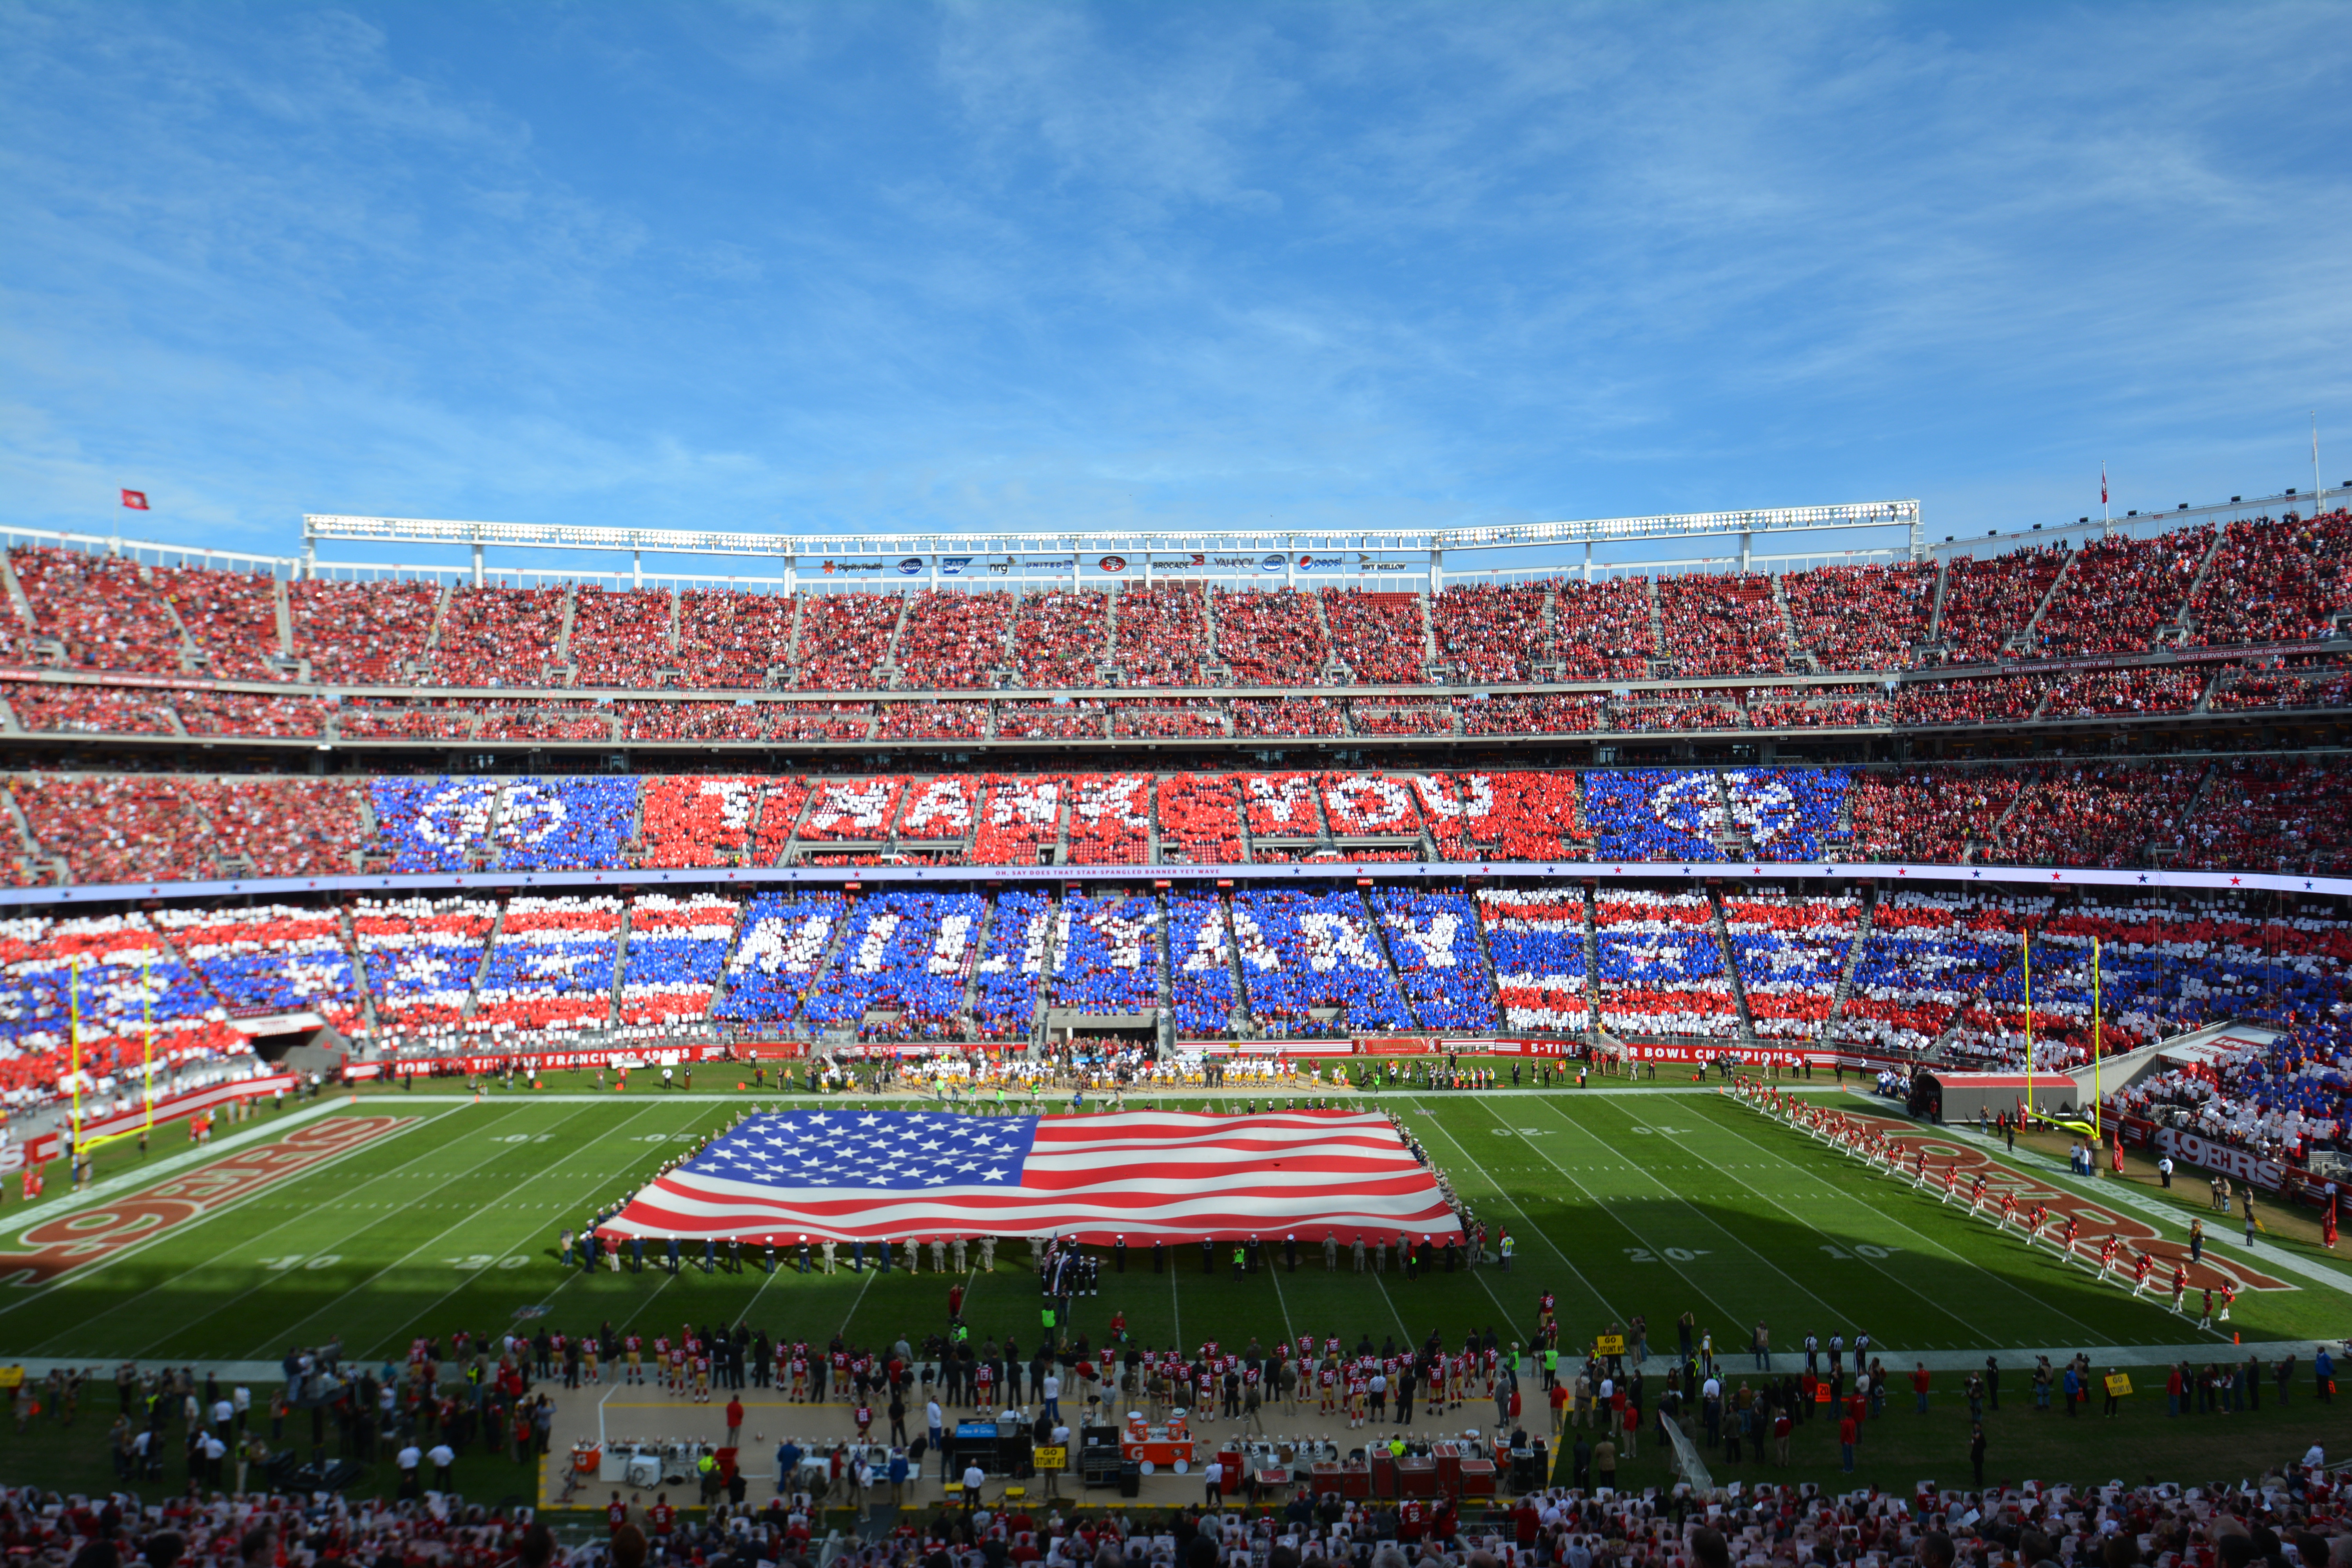 salute to service san francisco 49ers